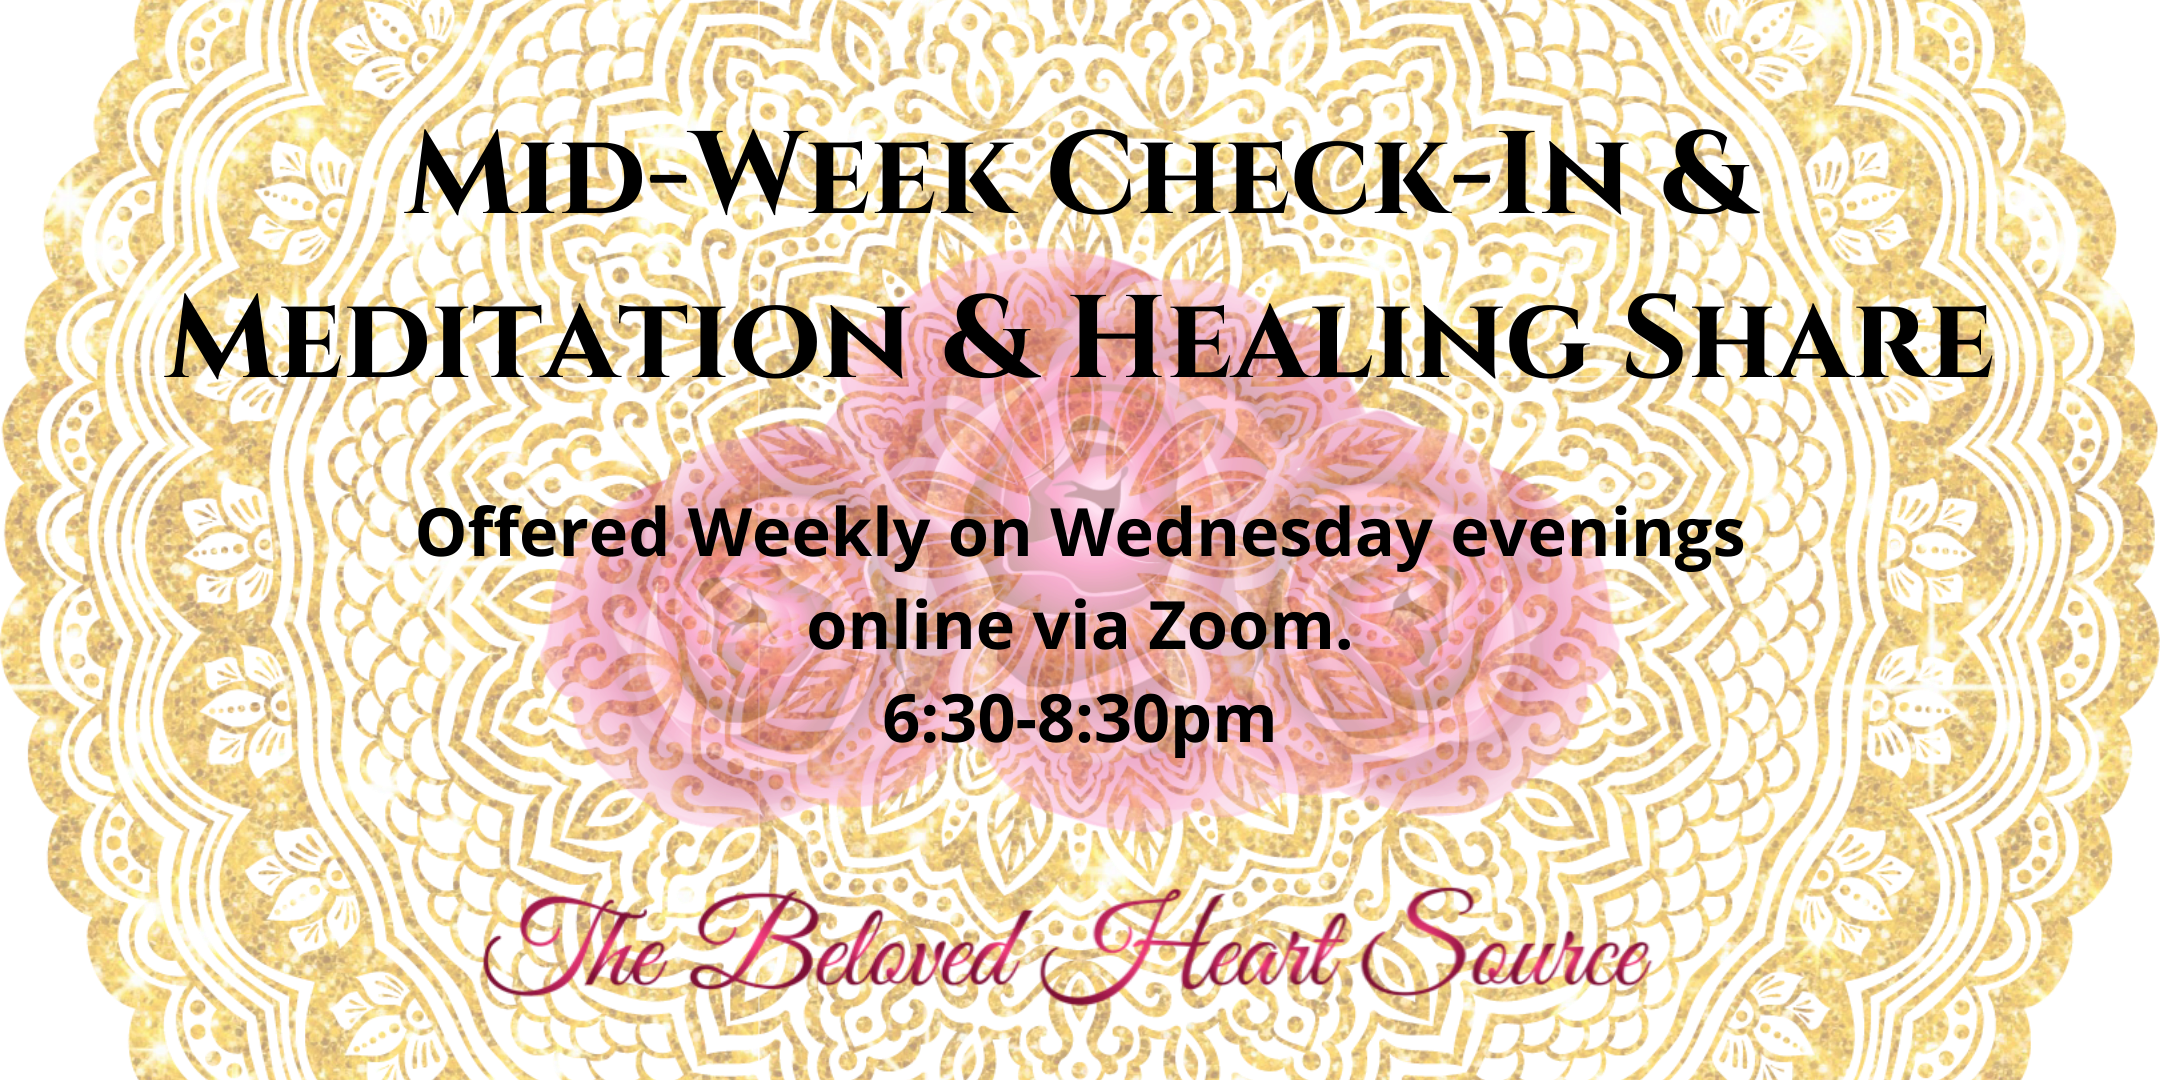 Mid-Week Check-In, Meditation & Healing Share offered Virtually